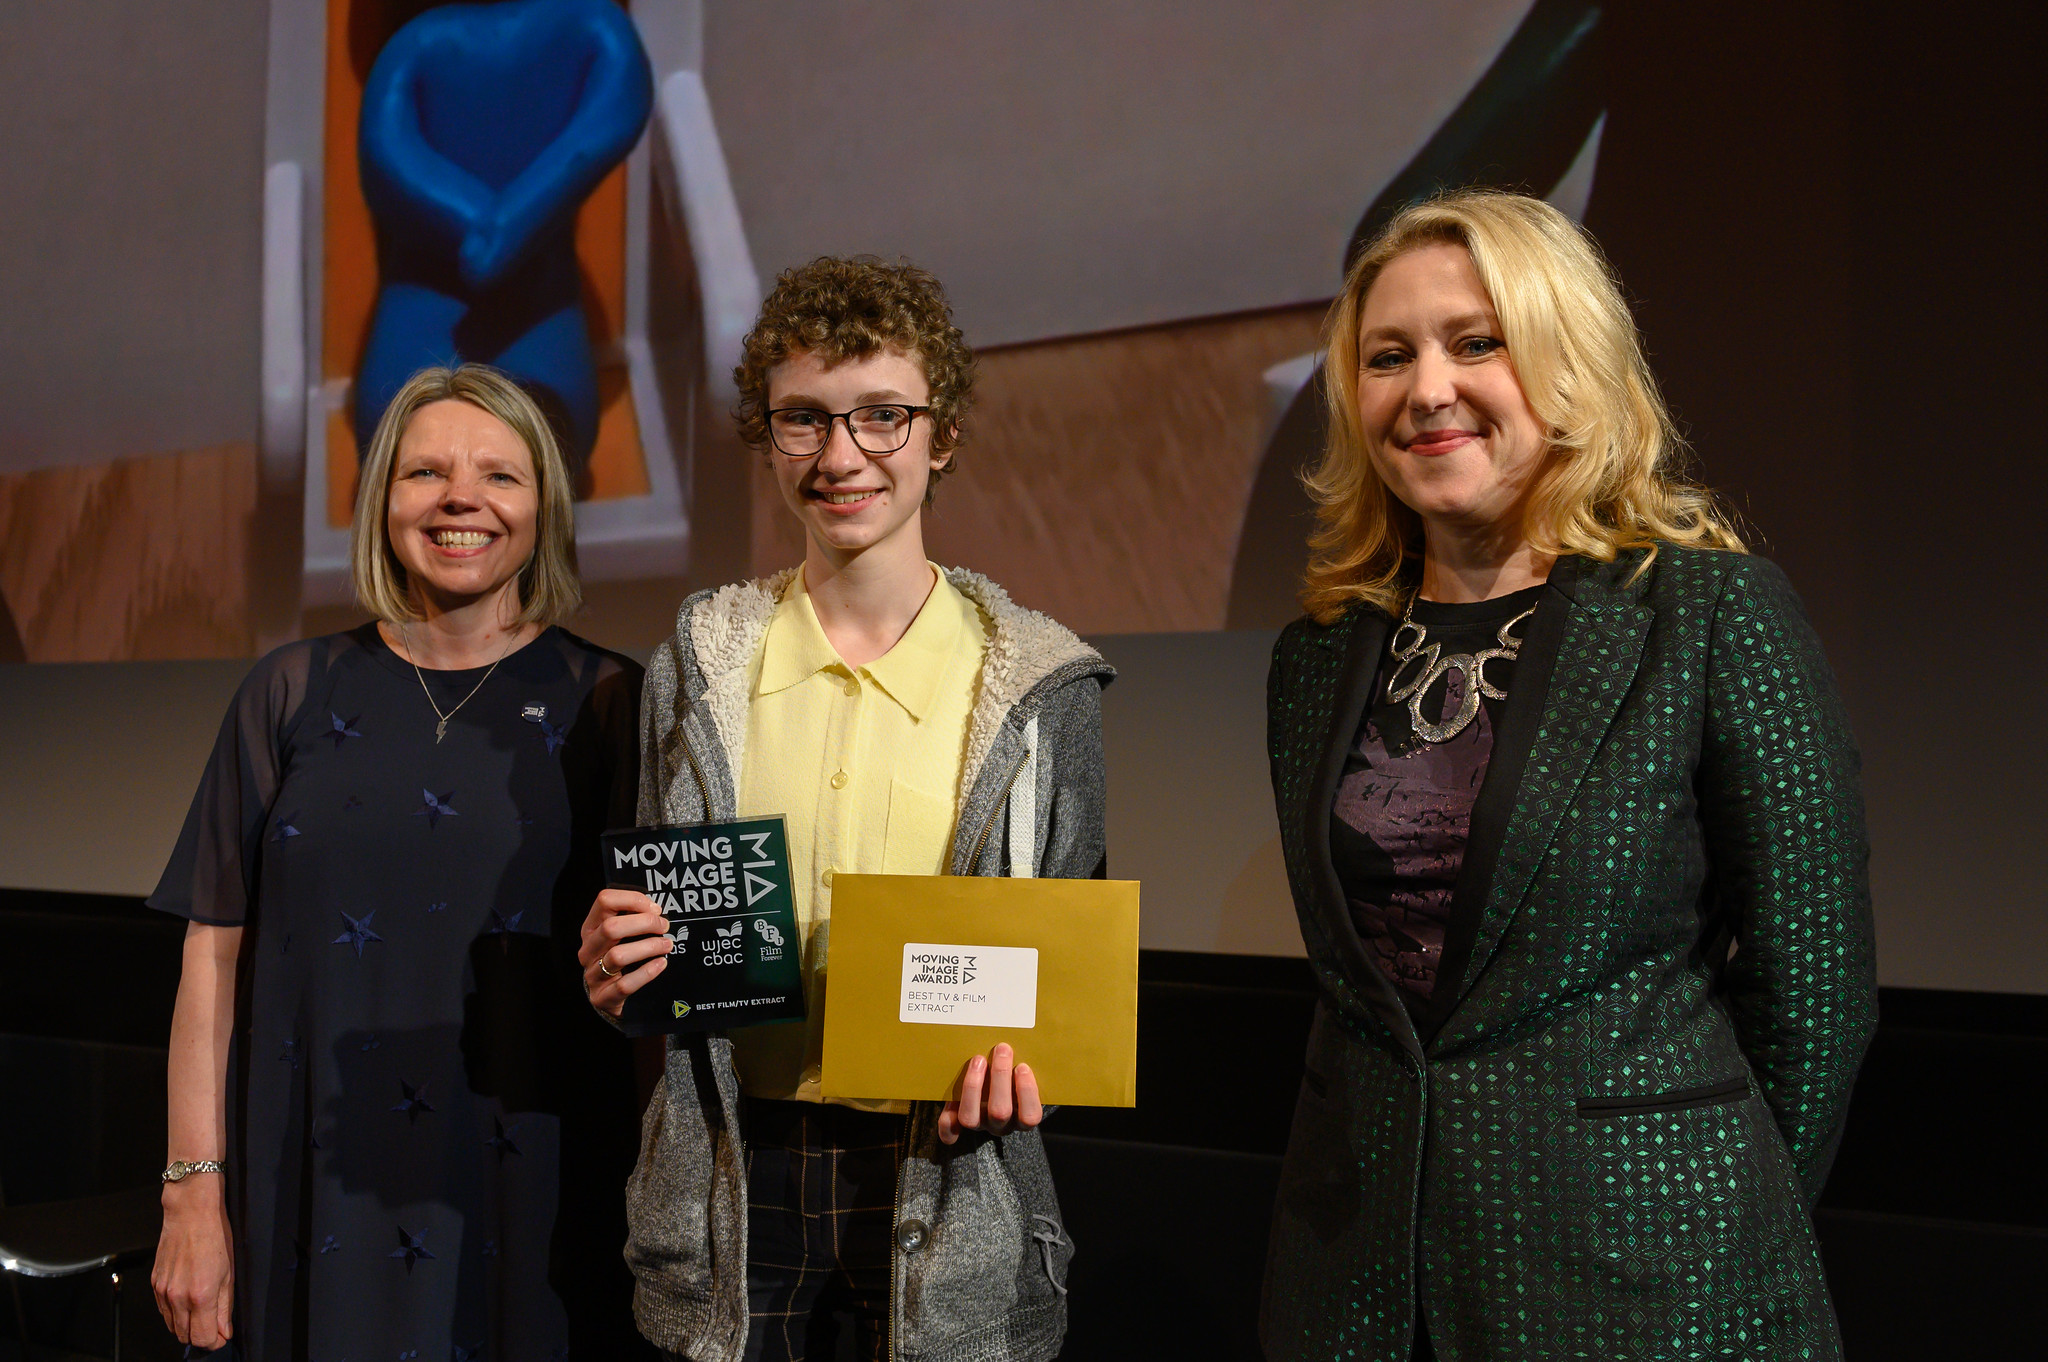 Nia Greenwood winning Best TV/Film Extract at the BFI/WJEC Moving Image Awards